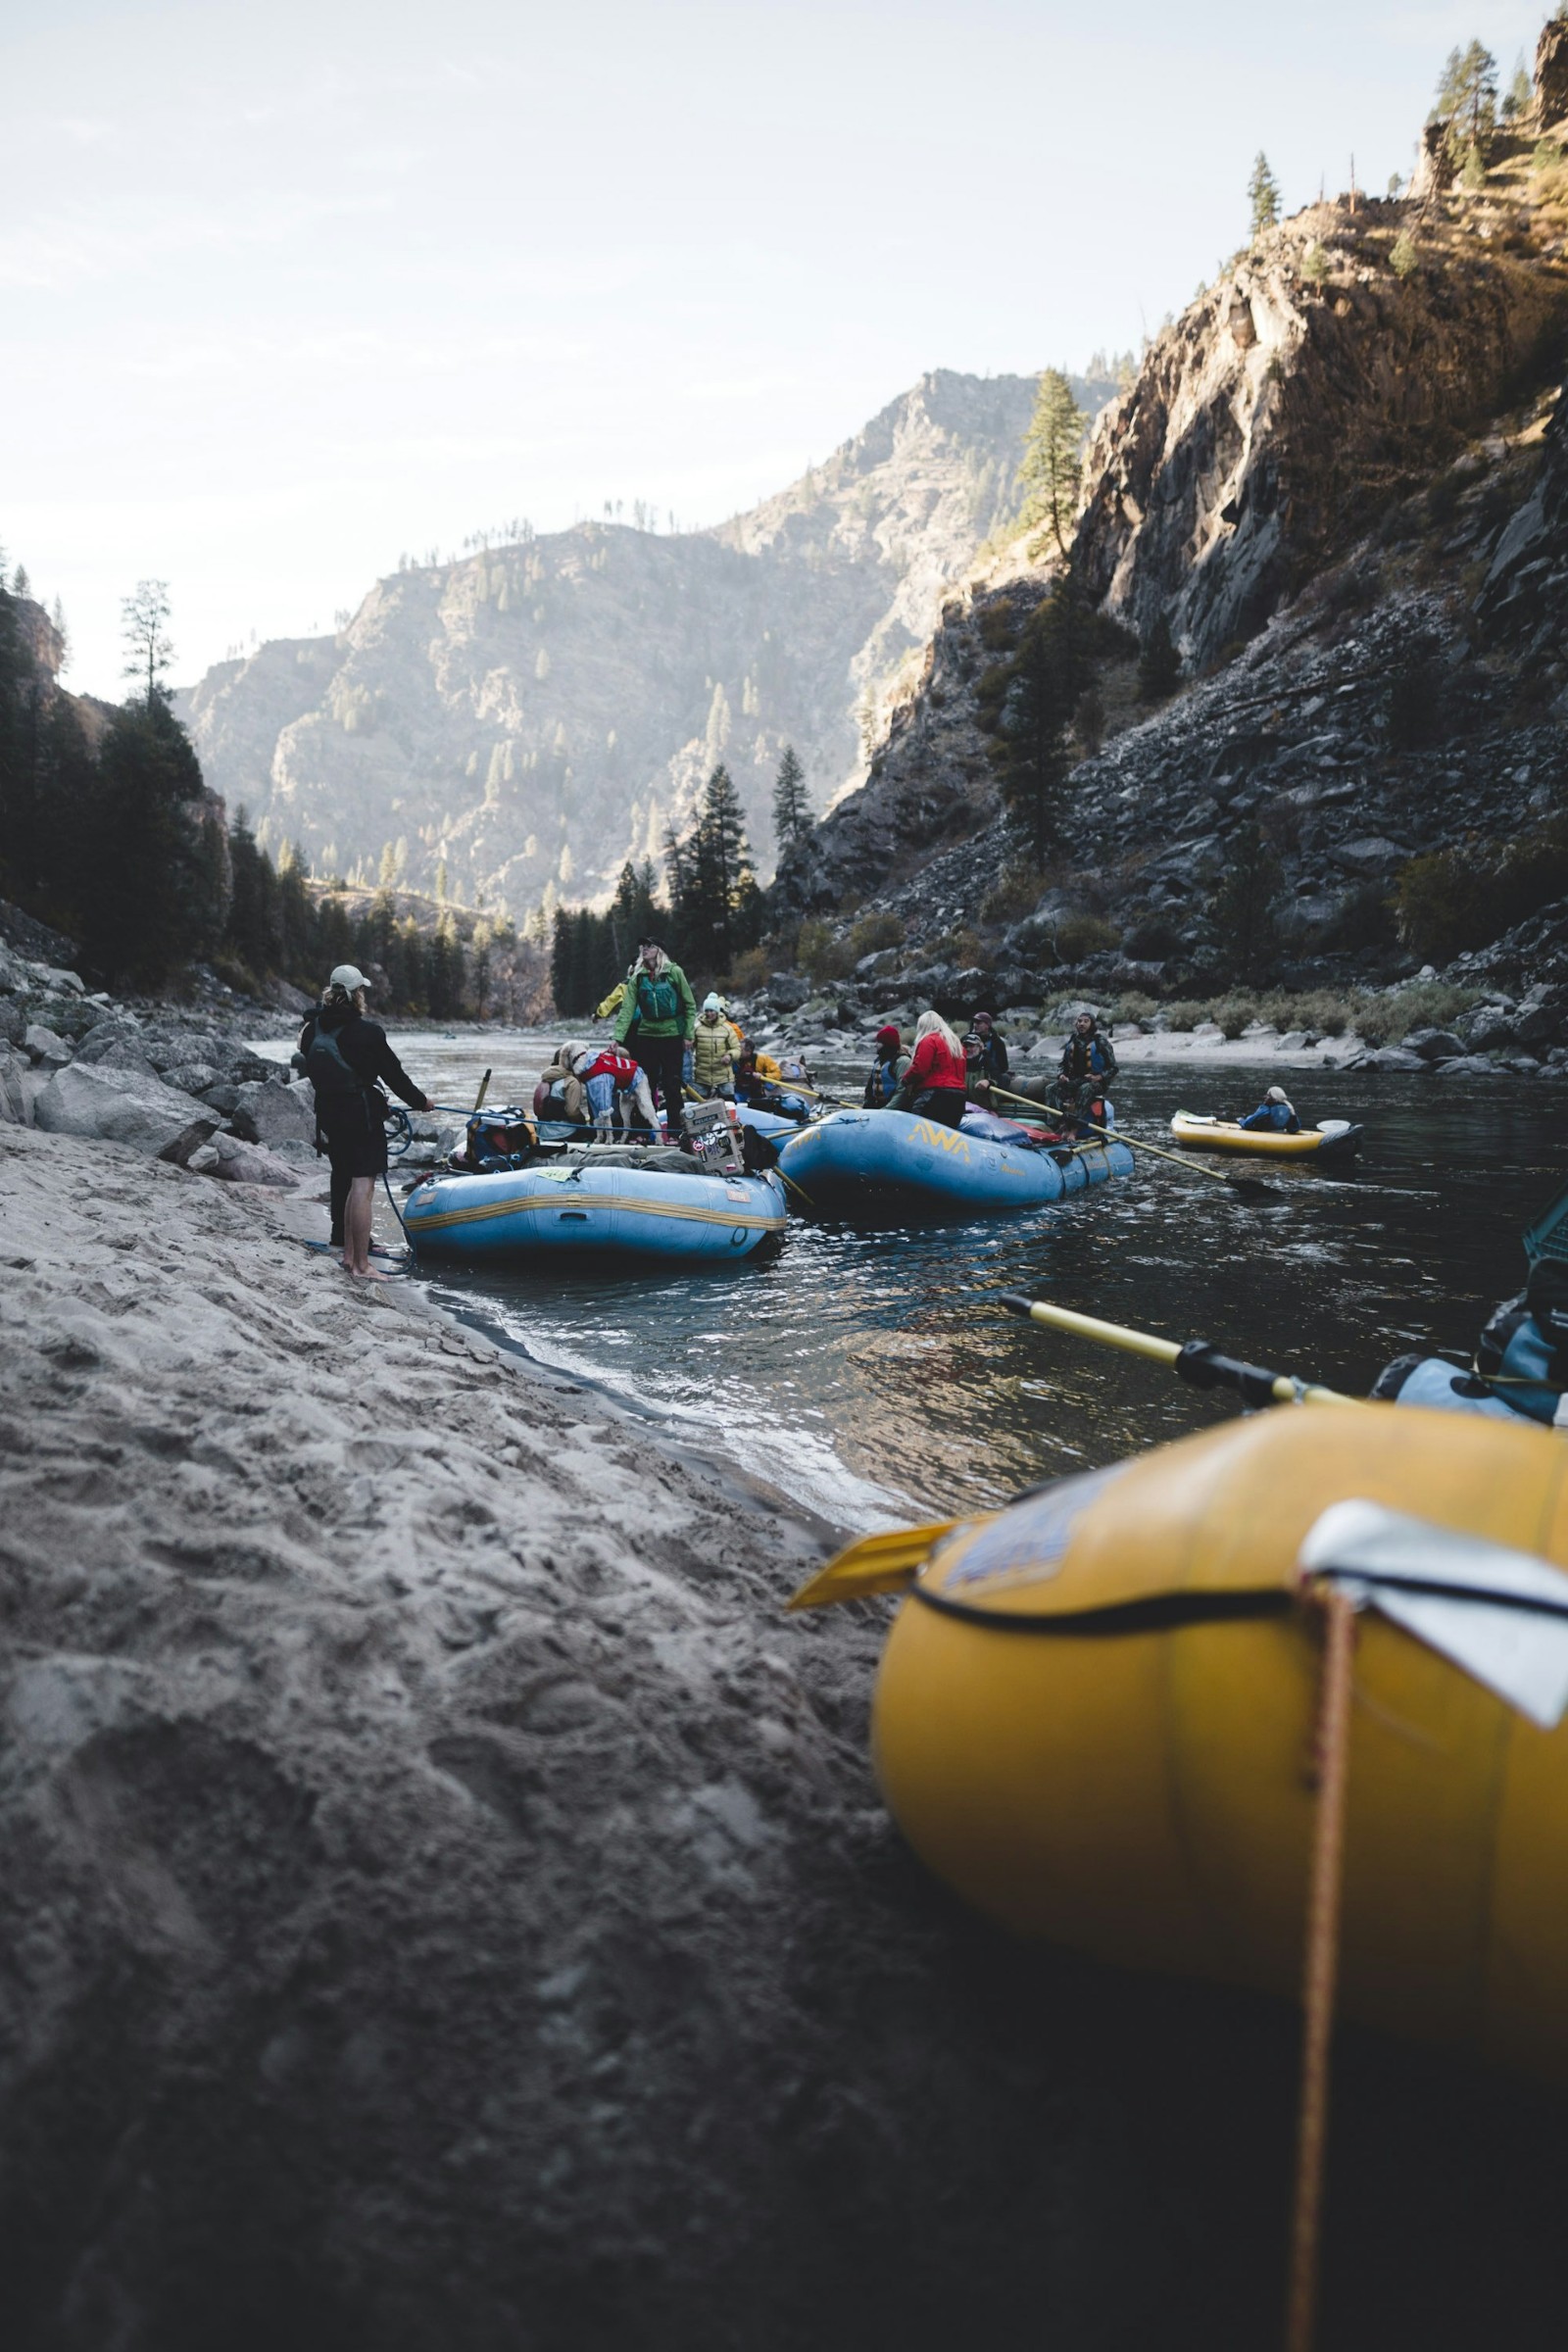 A group of people doing whitewater rafting in the wilderness.